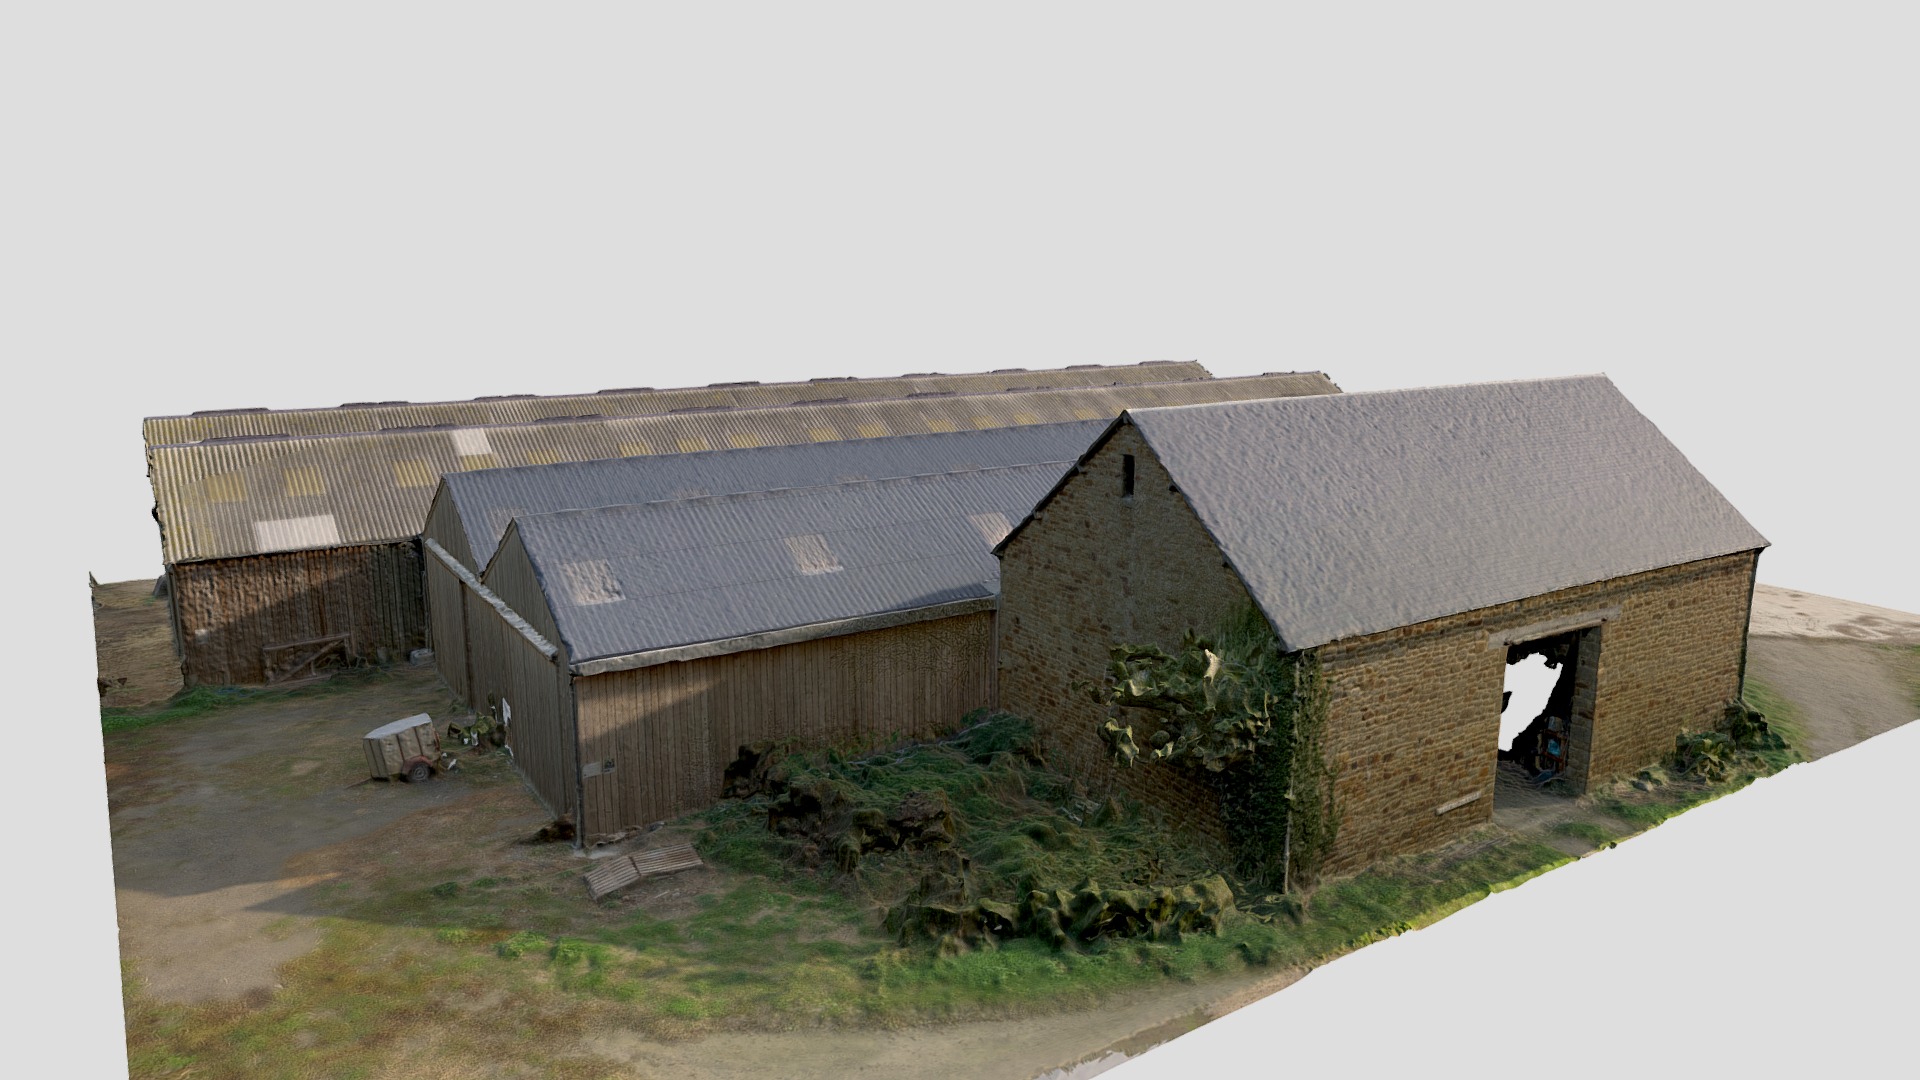 3D model Ferme des Obiones – Bâti 4/4 - This is a 3D model of the Ferme des Obiones - Bâti 4/4. The 3D model is about a couple of buildings with grass and bushes in front of them.